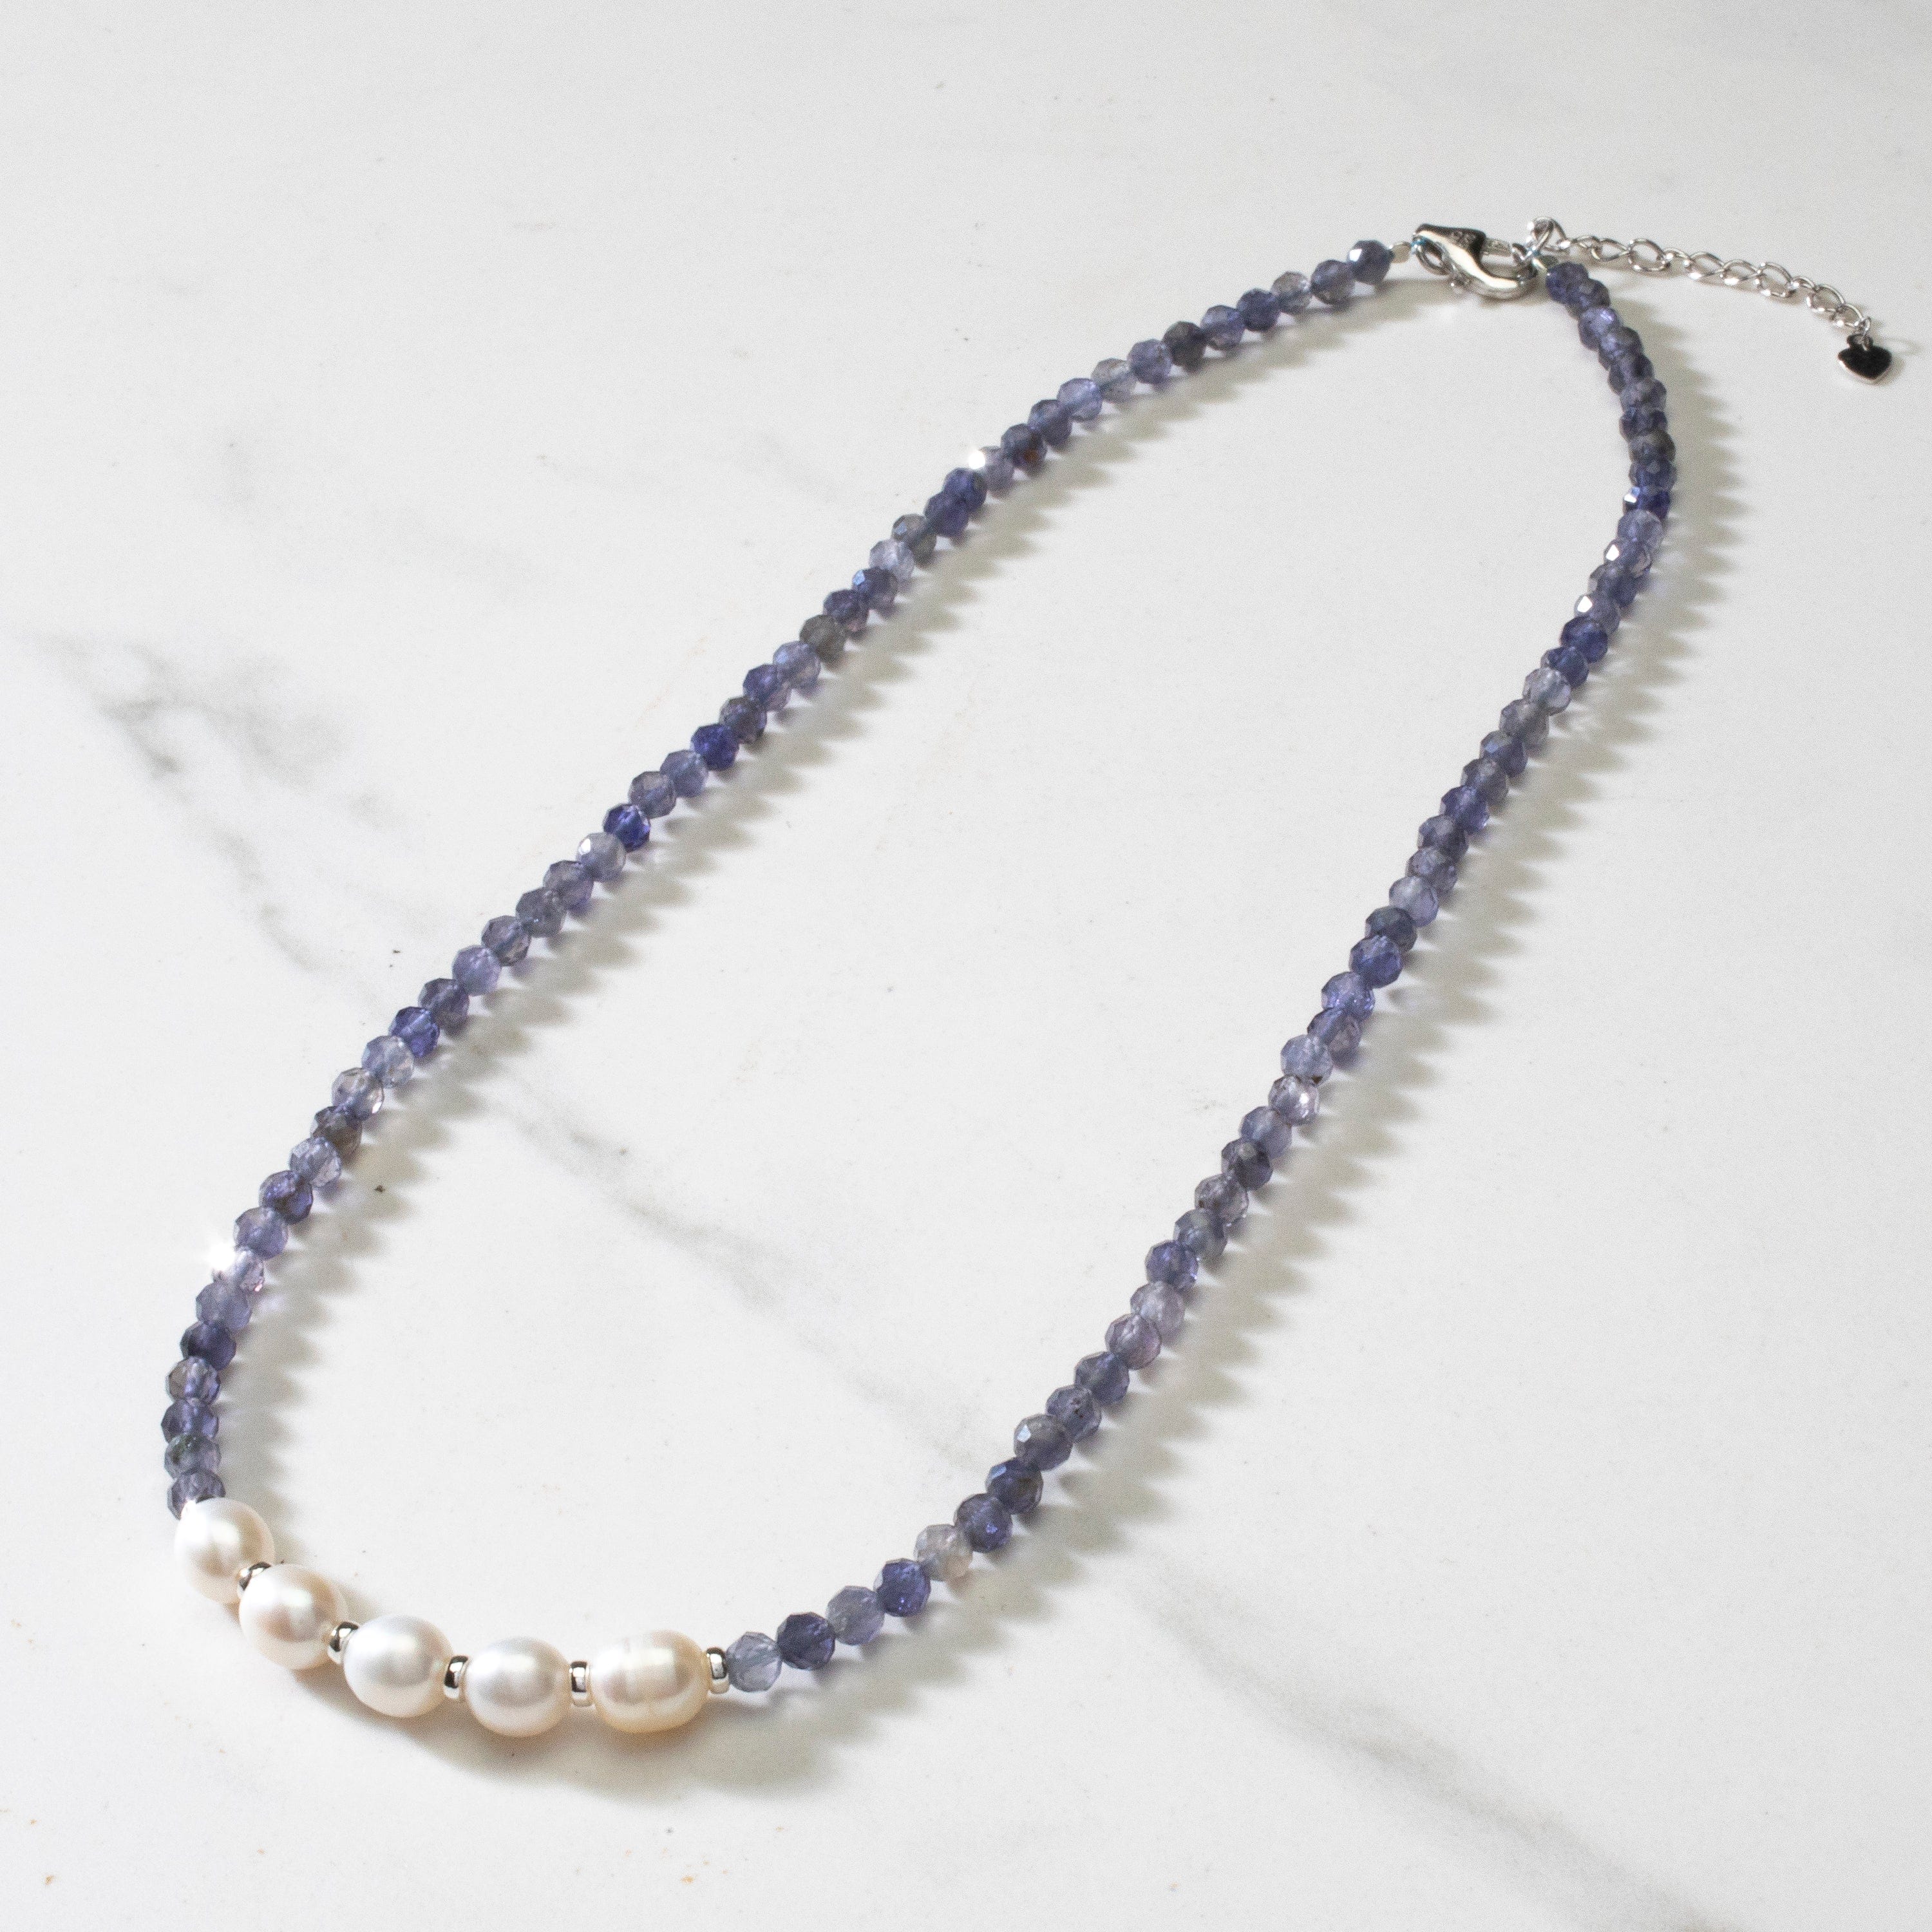 KALIFANO Jewelry 4mm Faceted Iolite Bead Necklace with 5 Pearls with 925 Silver Clasp 4MIO